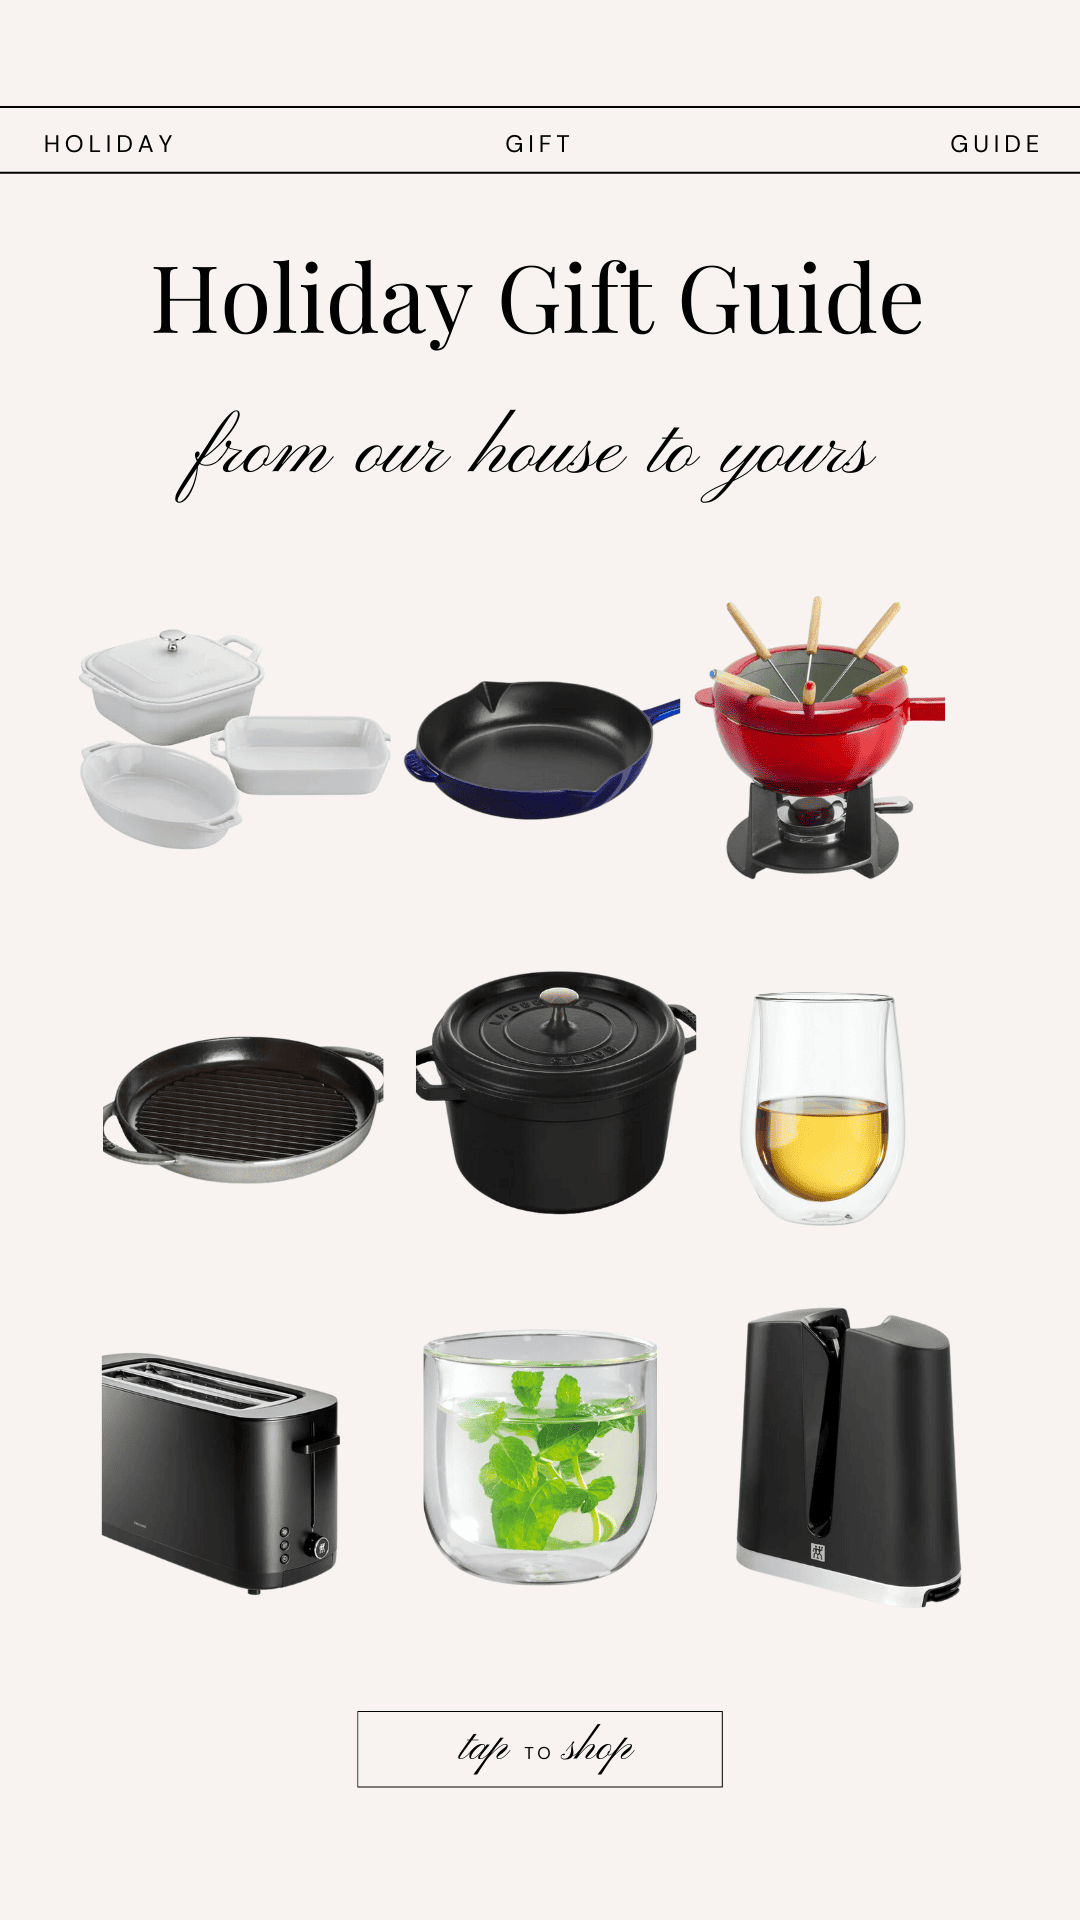 Holiday gift guide for cooks. 